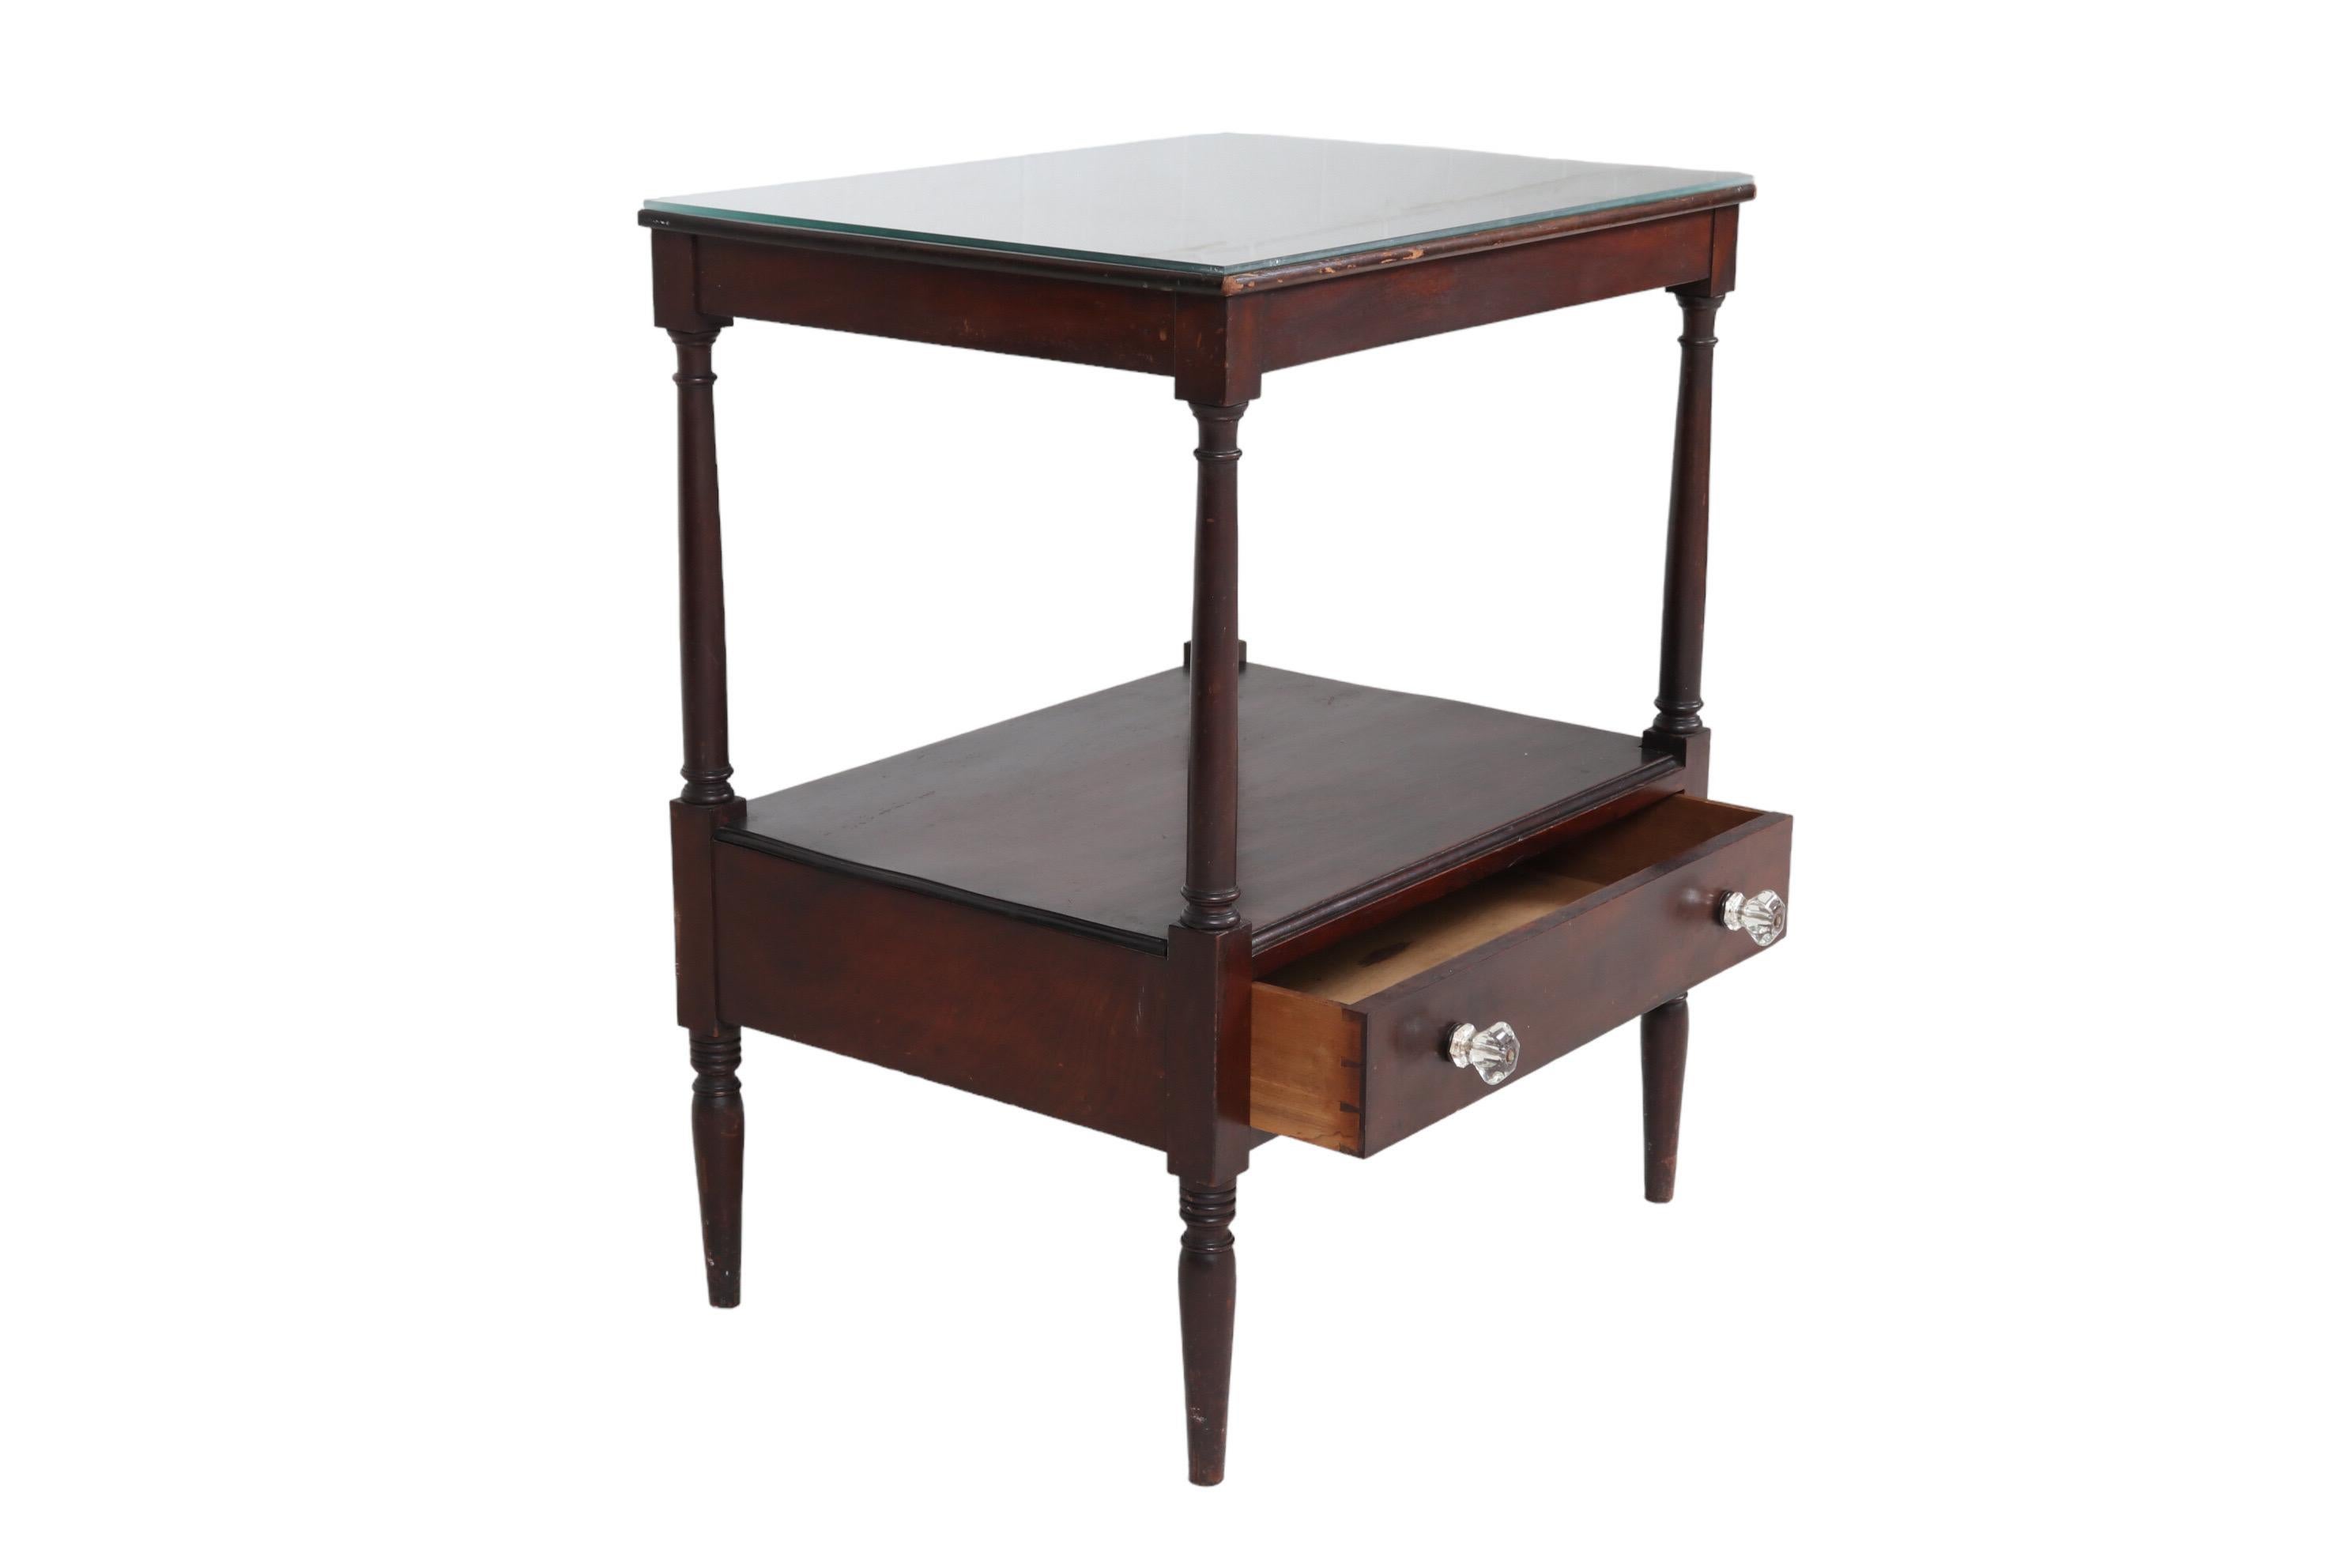 A French Directoire period side table made of mahogany. The tabletop is finished with a beveled edge and has a protective glass cover. Below, a single drawer is hand dovetailed and opens with two round glass knob handles. Supported above and below